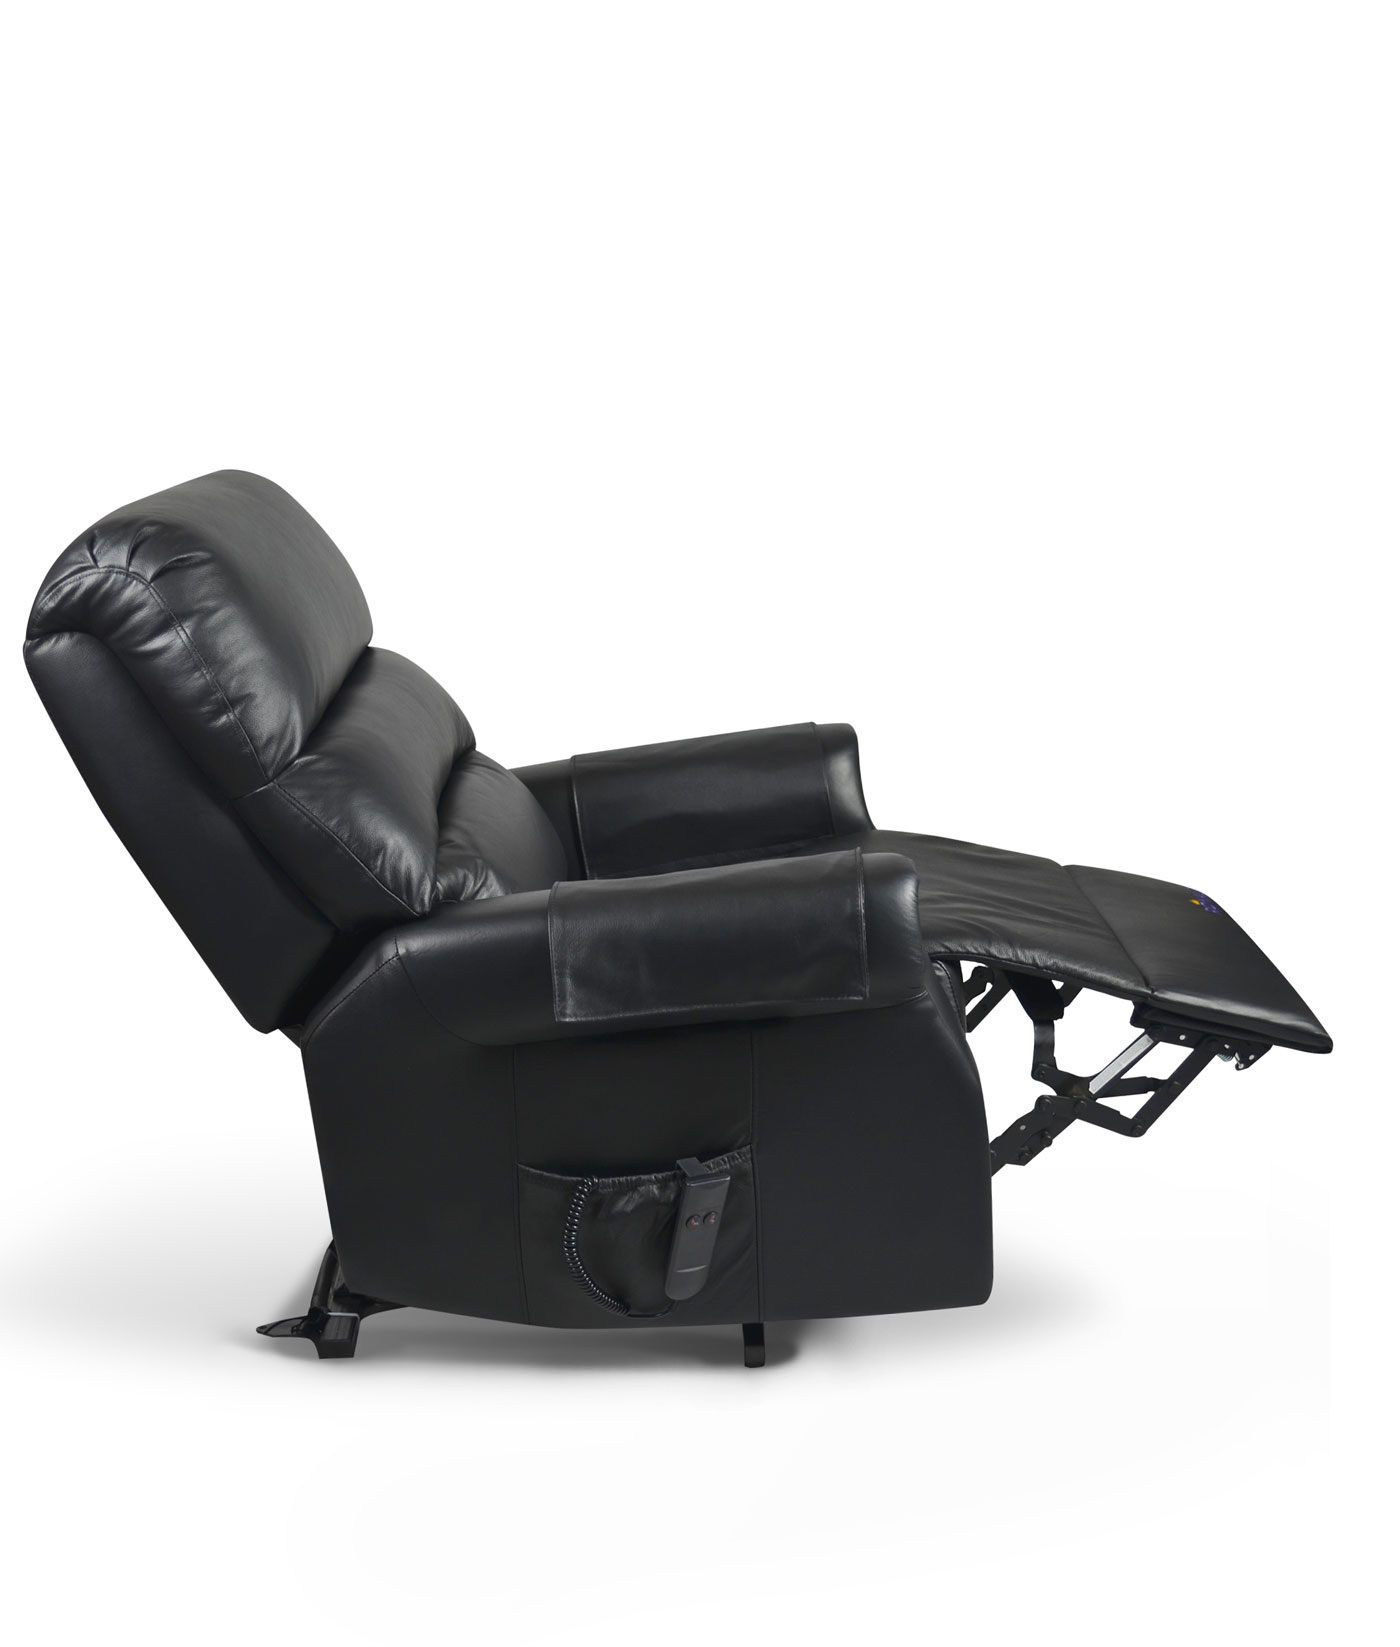 Mayfair-Luxury-Electric-Lift-Chair-Recliner_3